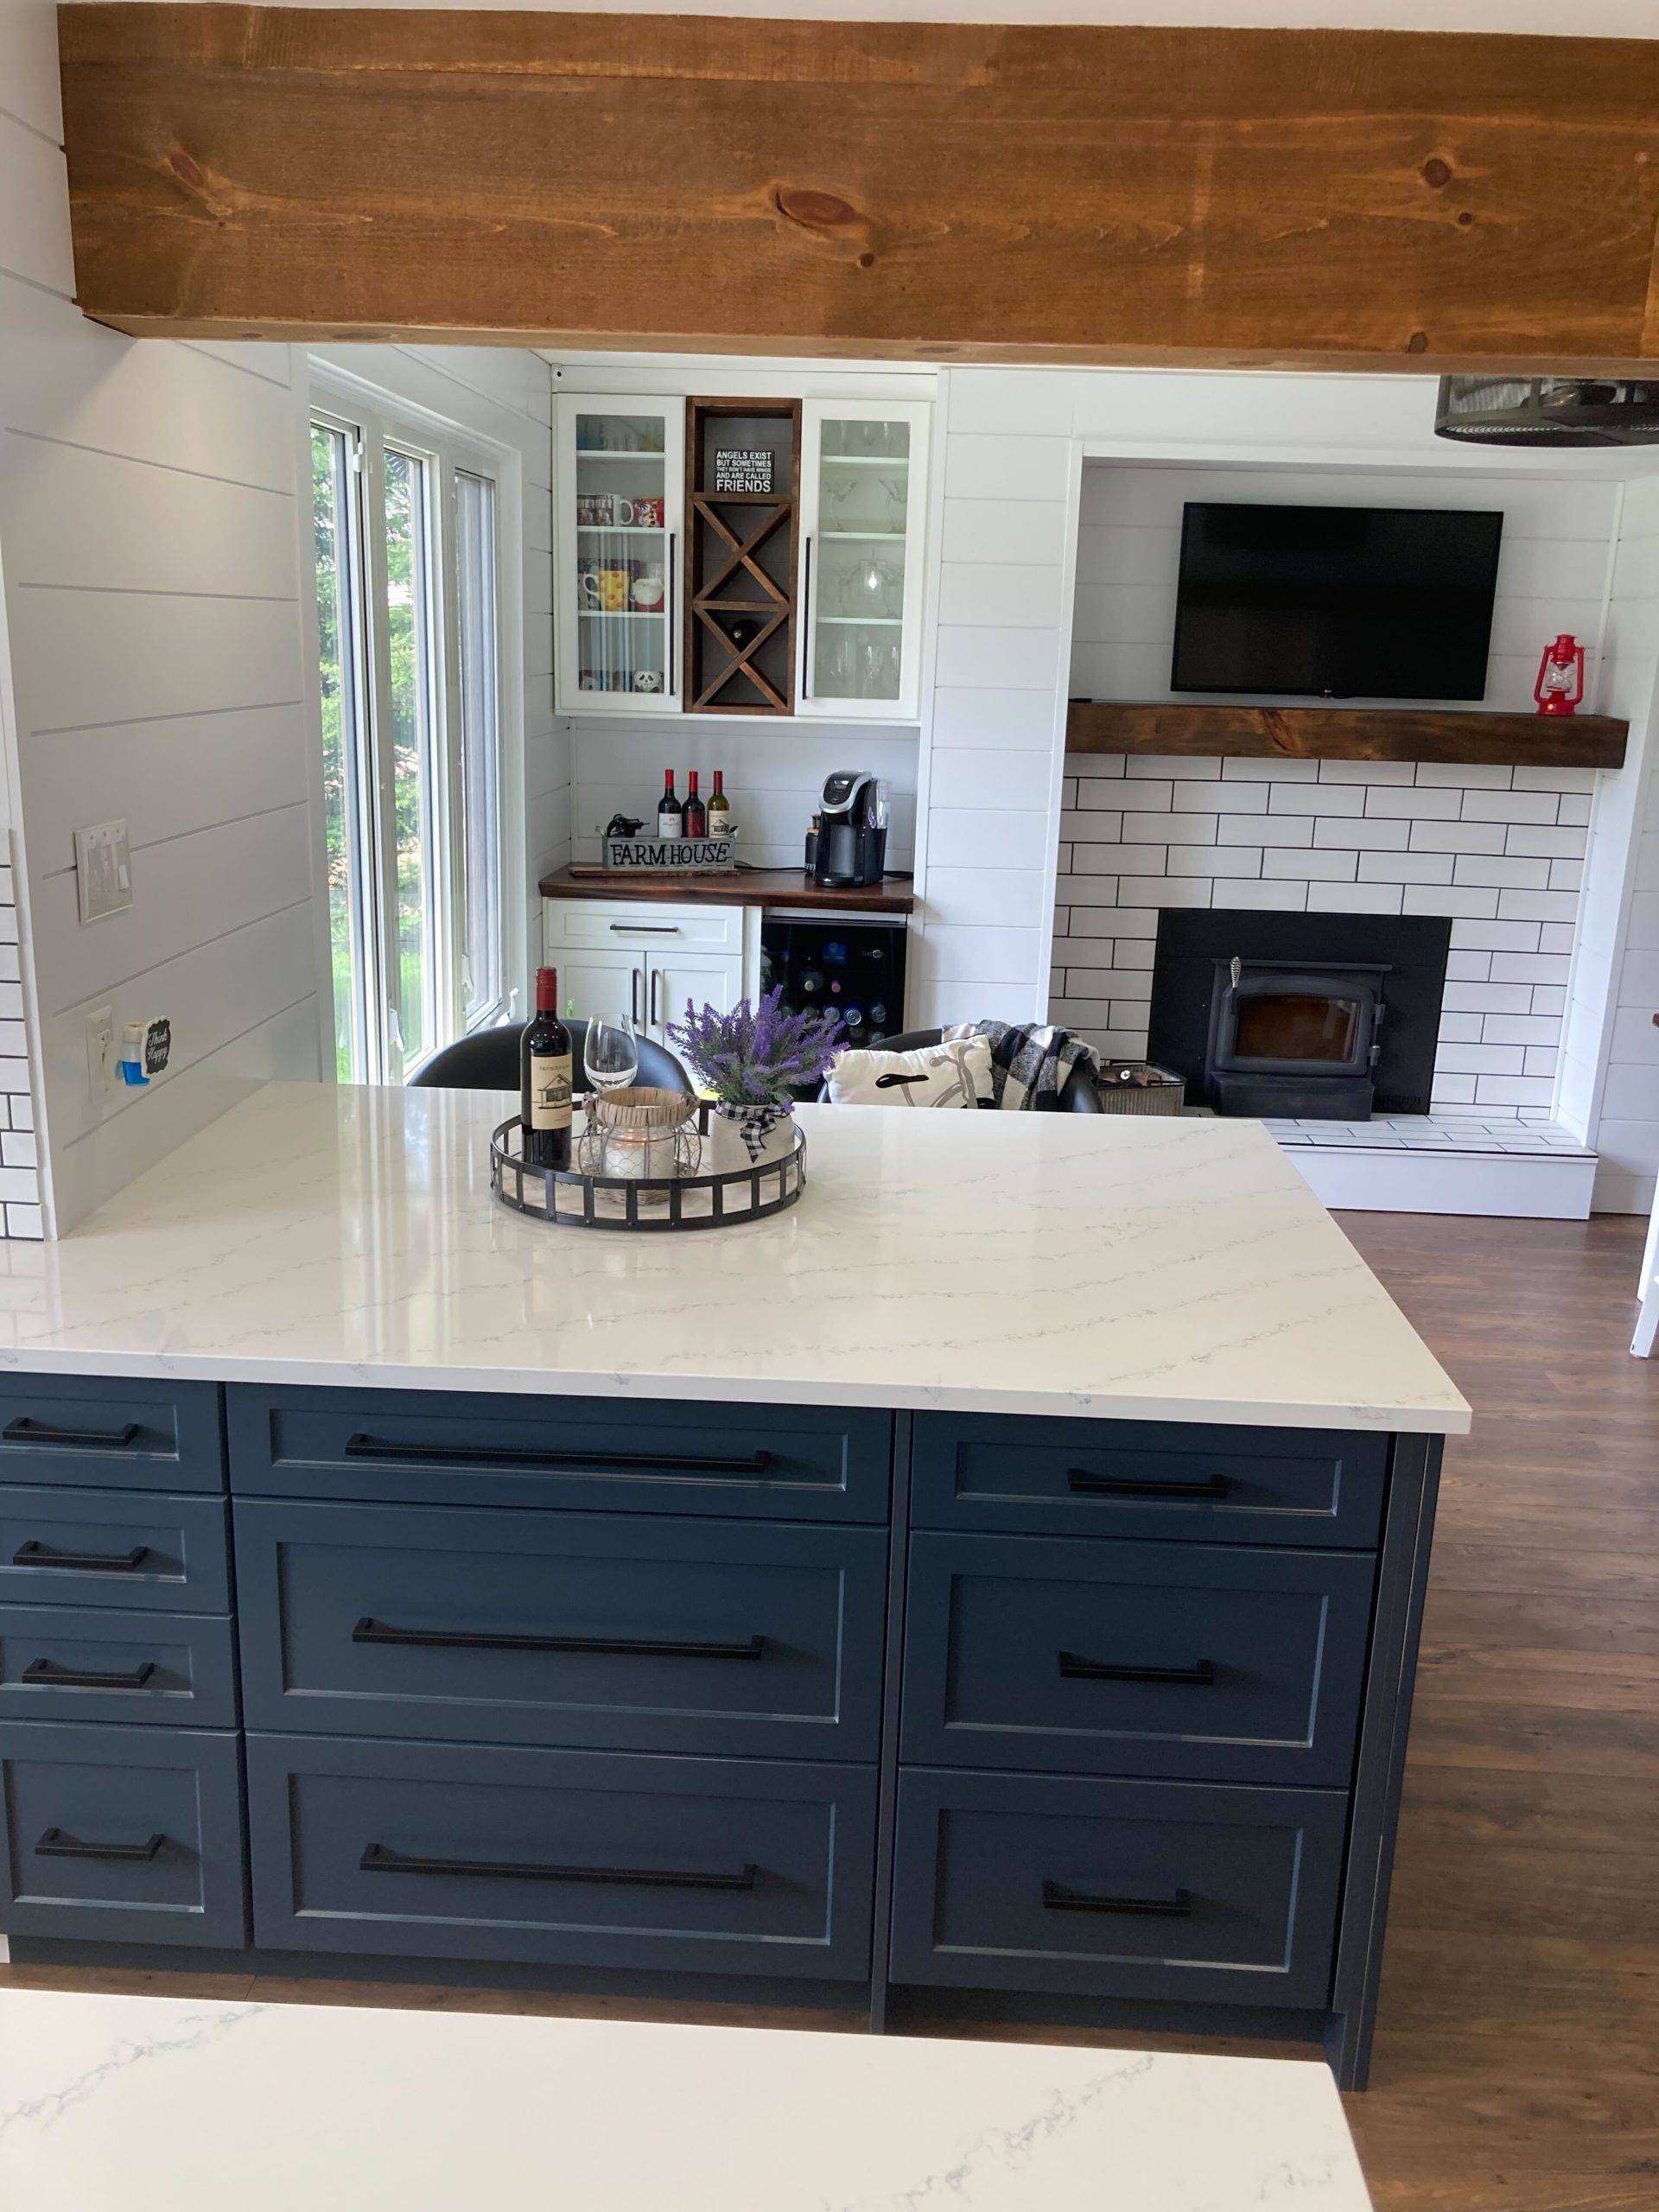 quartz kitchen countertops on blue cabinets with wooden beam overhead